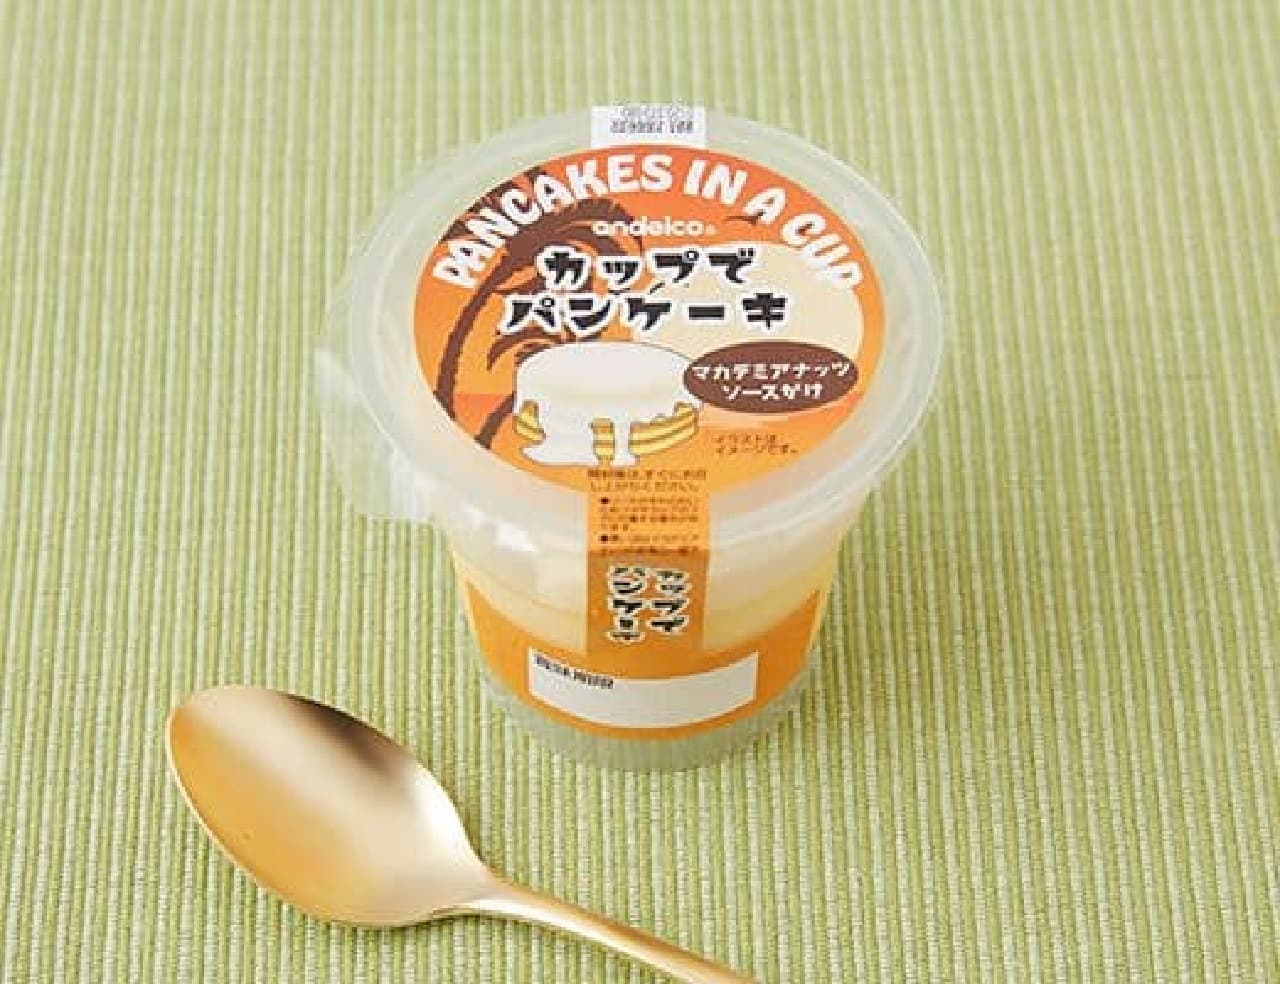 Lawson "And Glory Pancakes in a Cup 79g"